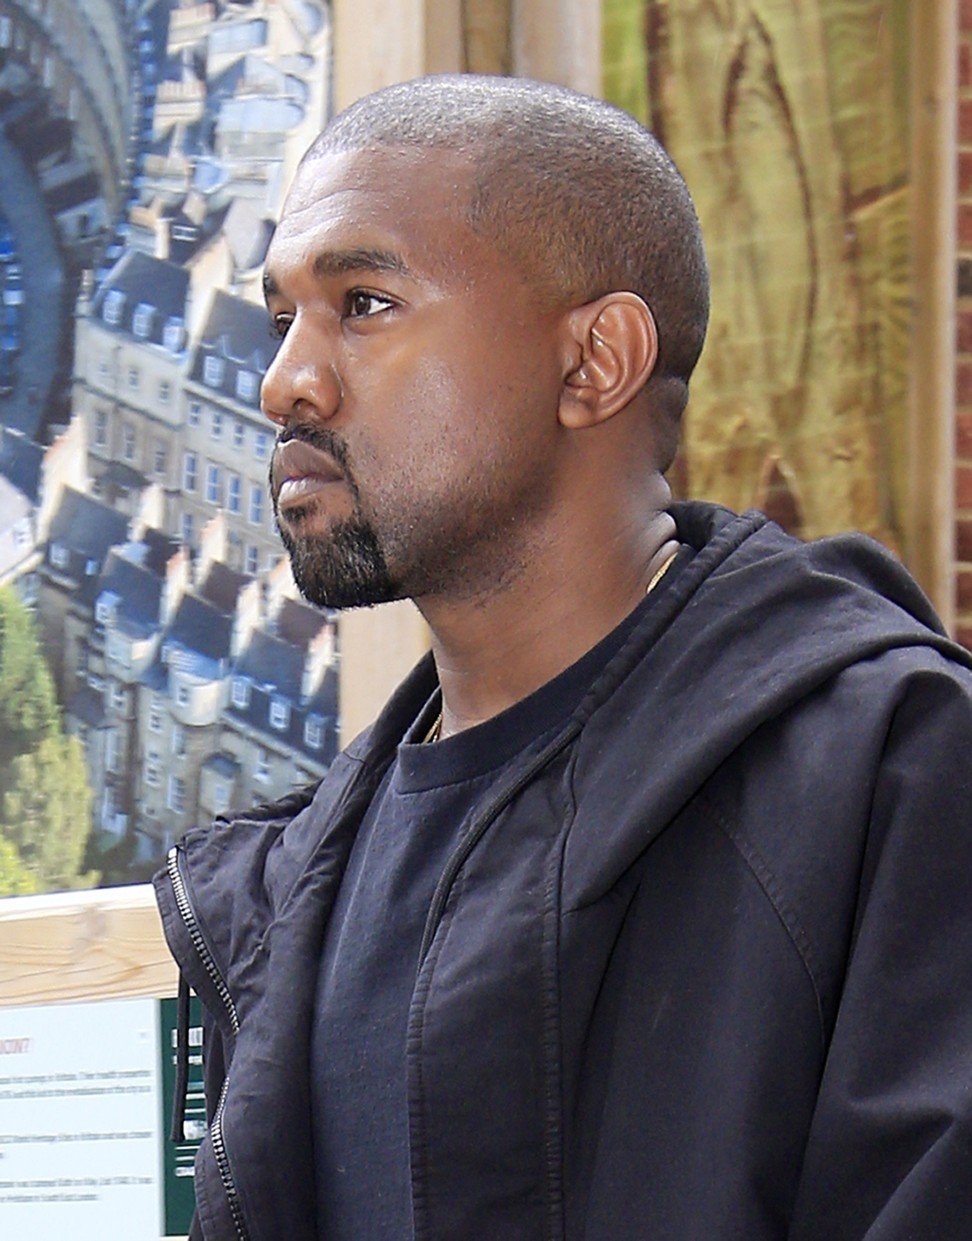 Kanye West To Take Over Virgil Abloh's Position At Louis Vuitton?